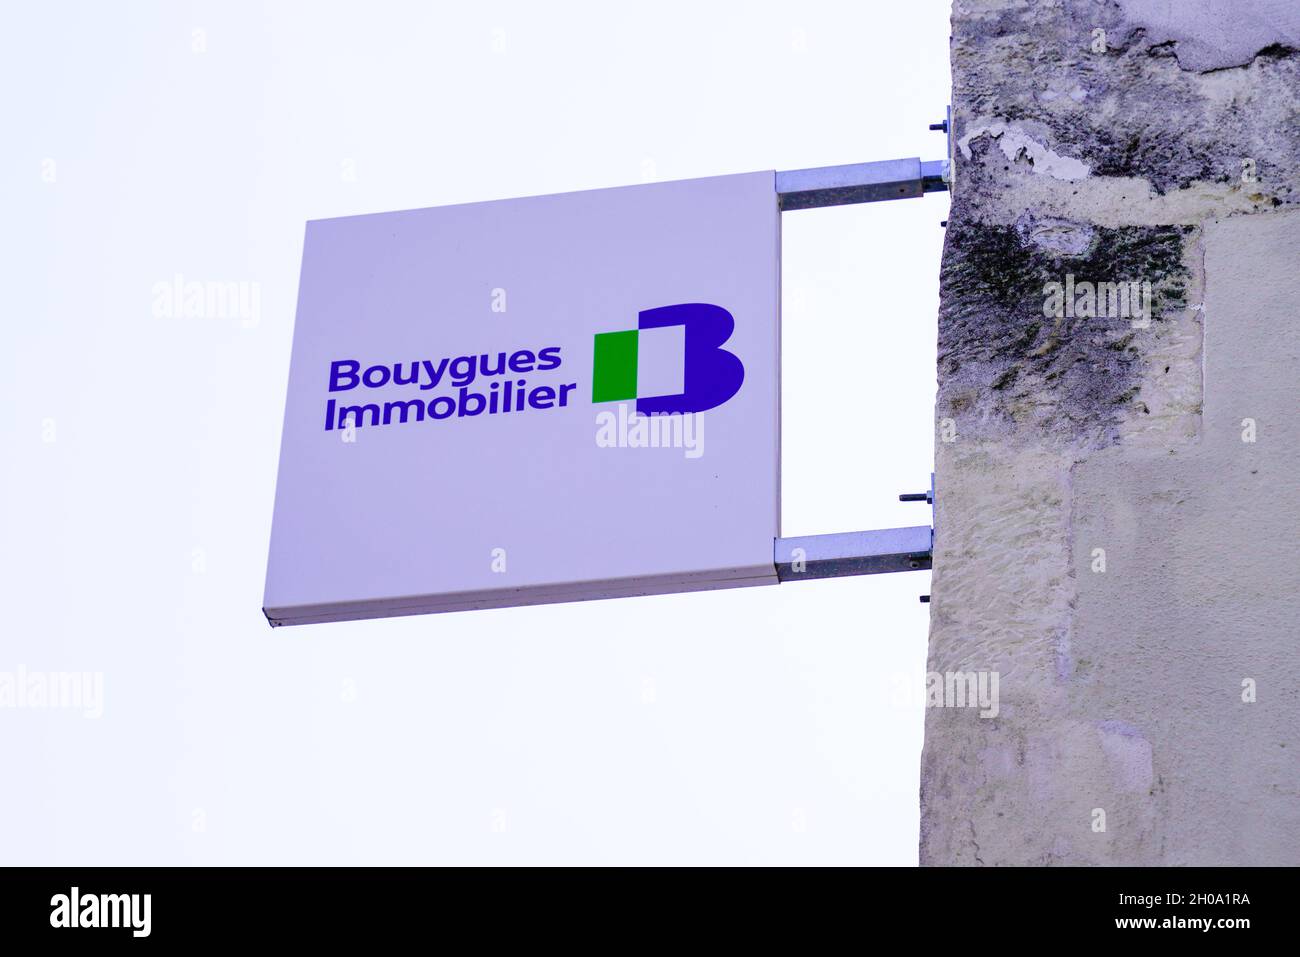 Bordeaux , Aquitaine France - 07 25 2021 : Bouygues Immobilier text sign and logo brand construction housing residential office Stock Photo